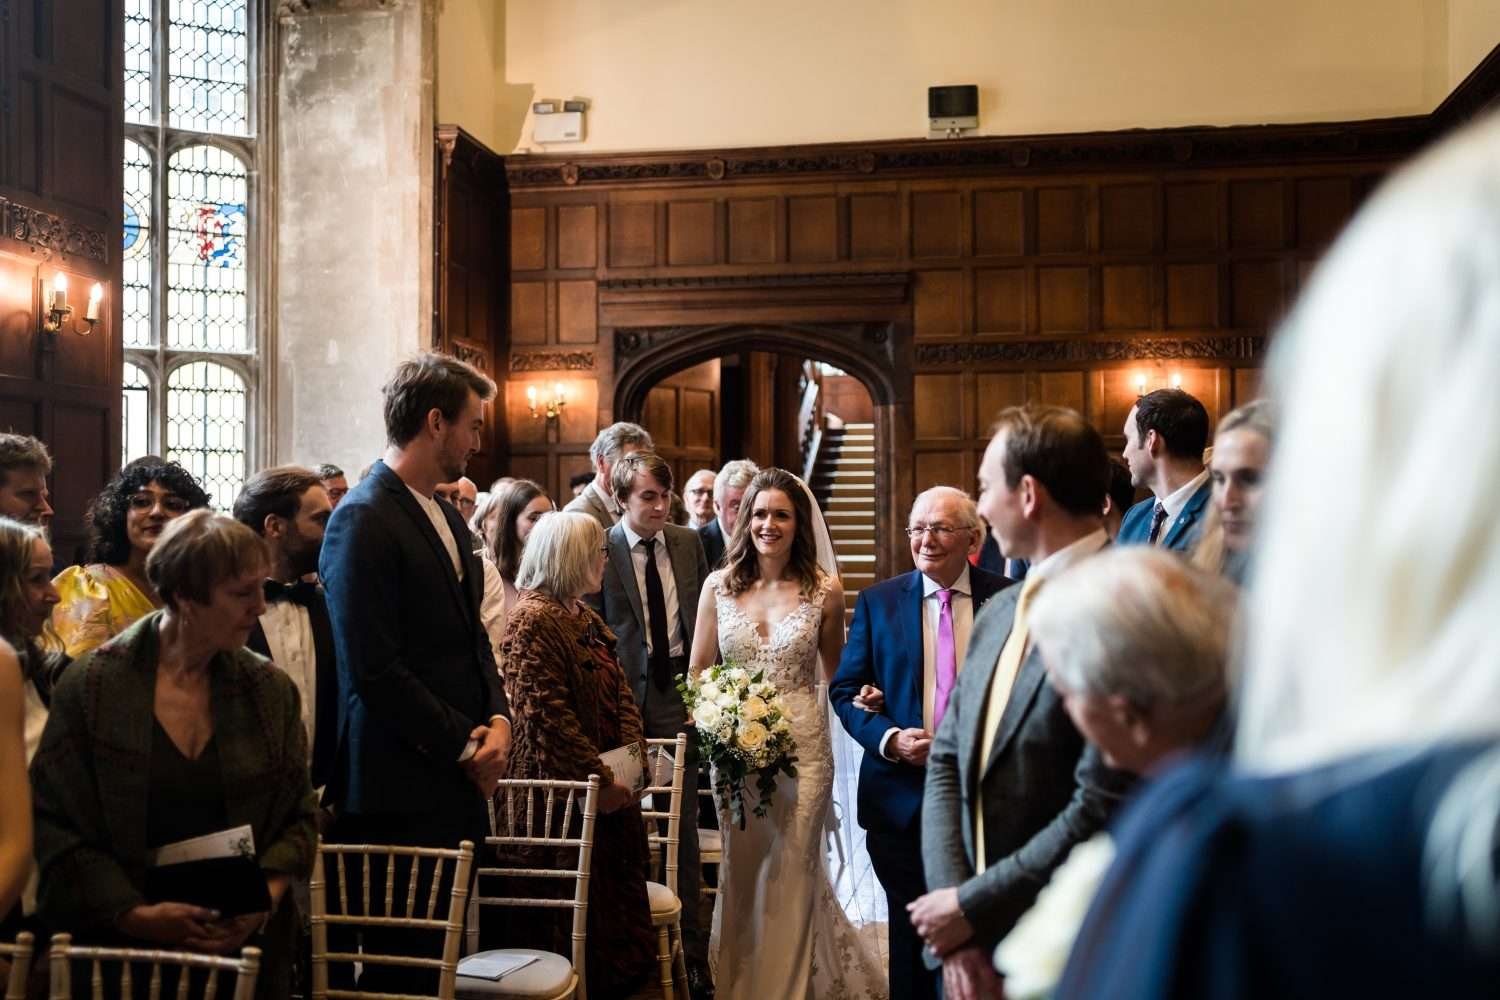 A Bride is escorted down the aisle by her father at her wedding. She is smiling at her groom (not shown) as she moves through the congregation of family and friends who are all smiling at her as she passes. 